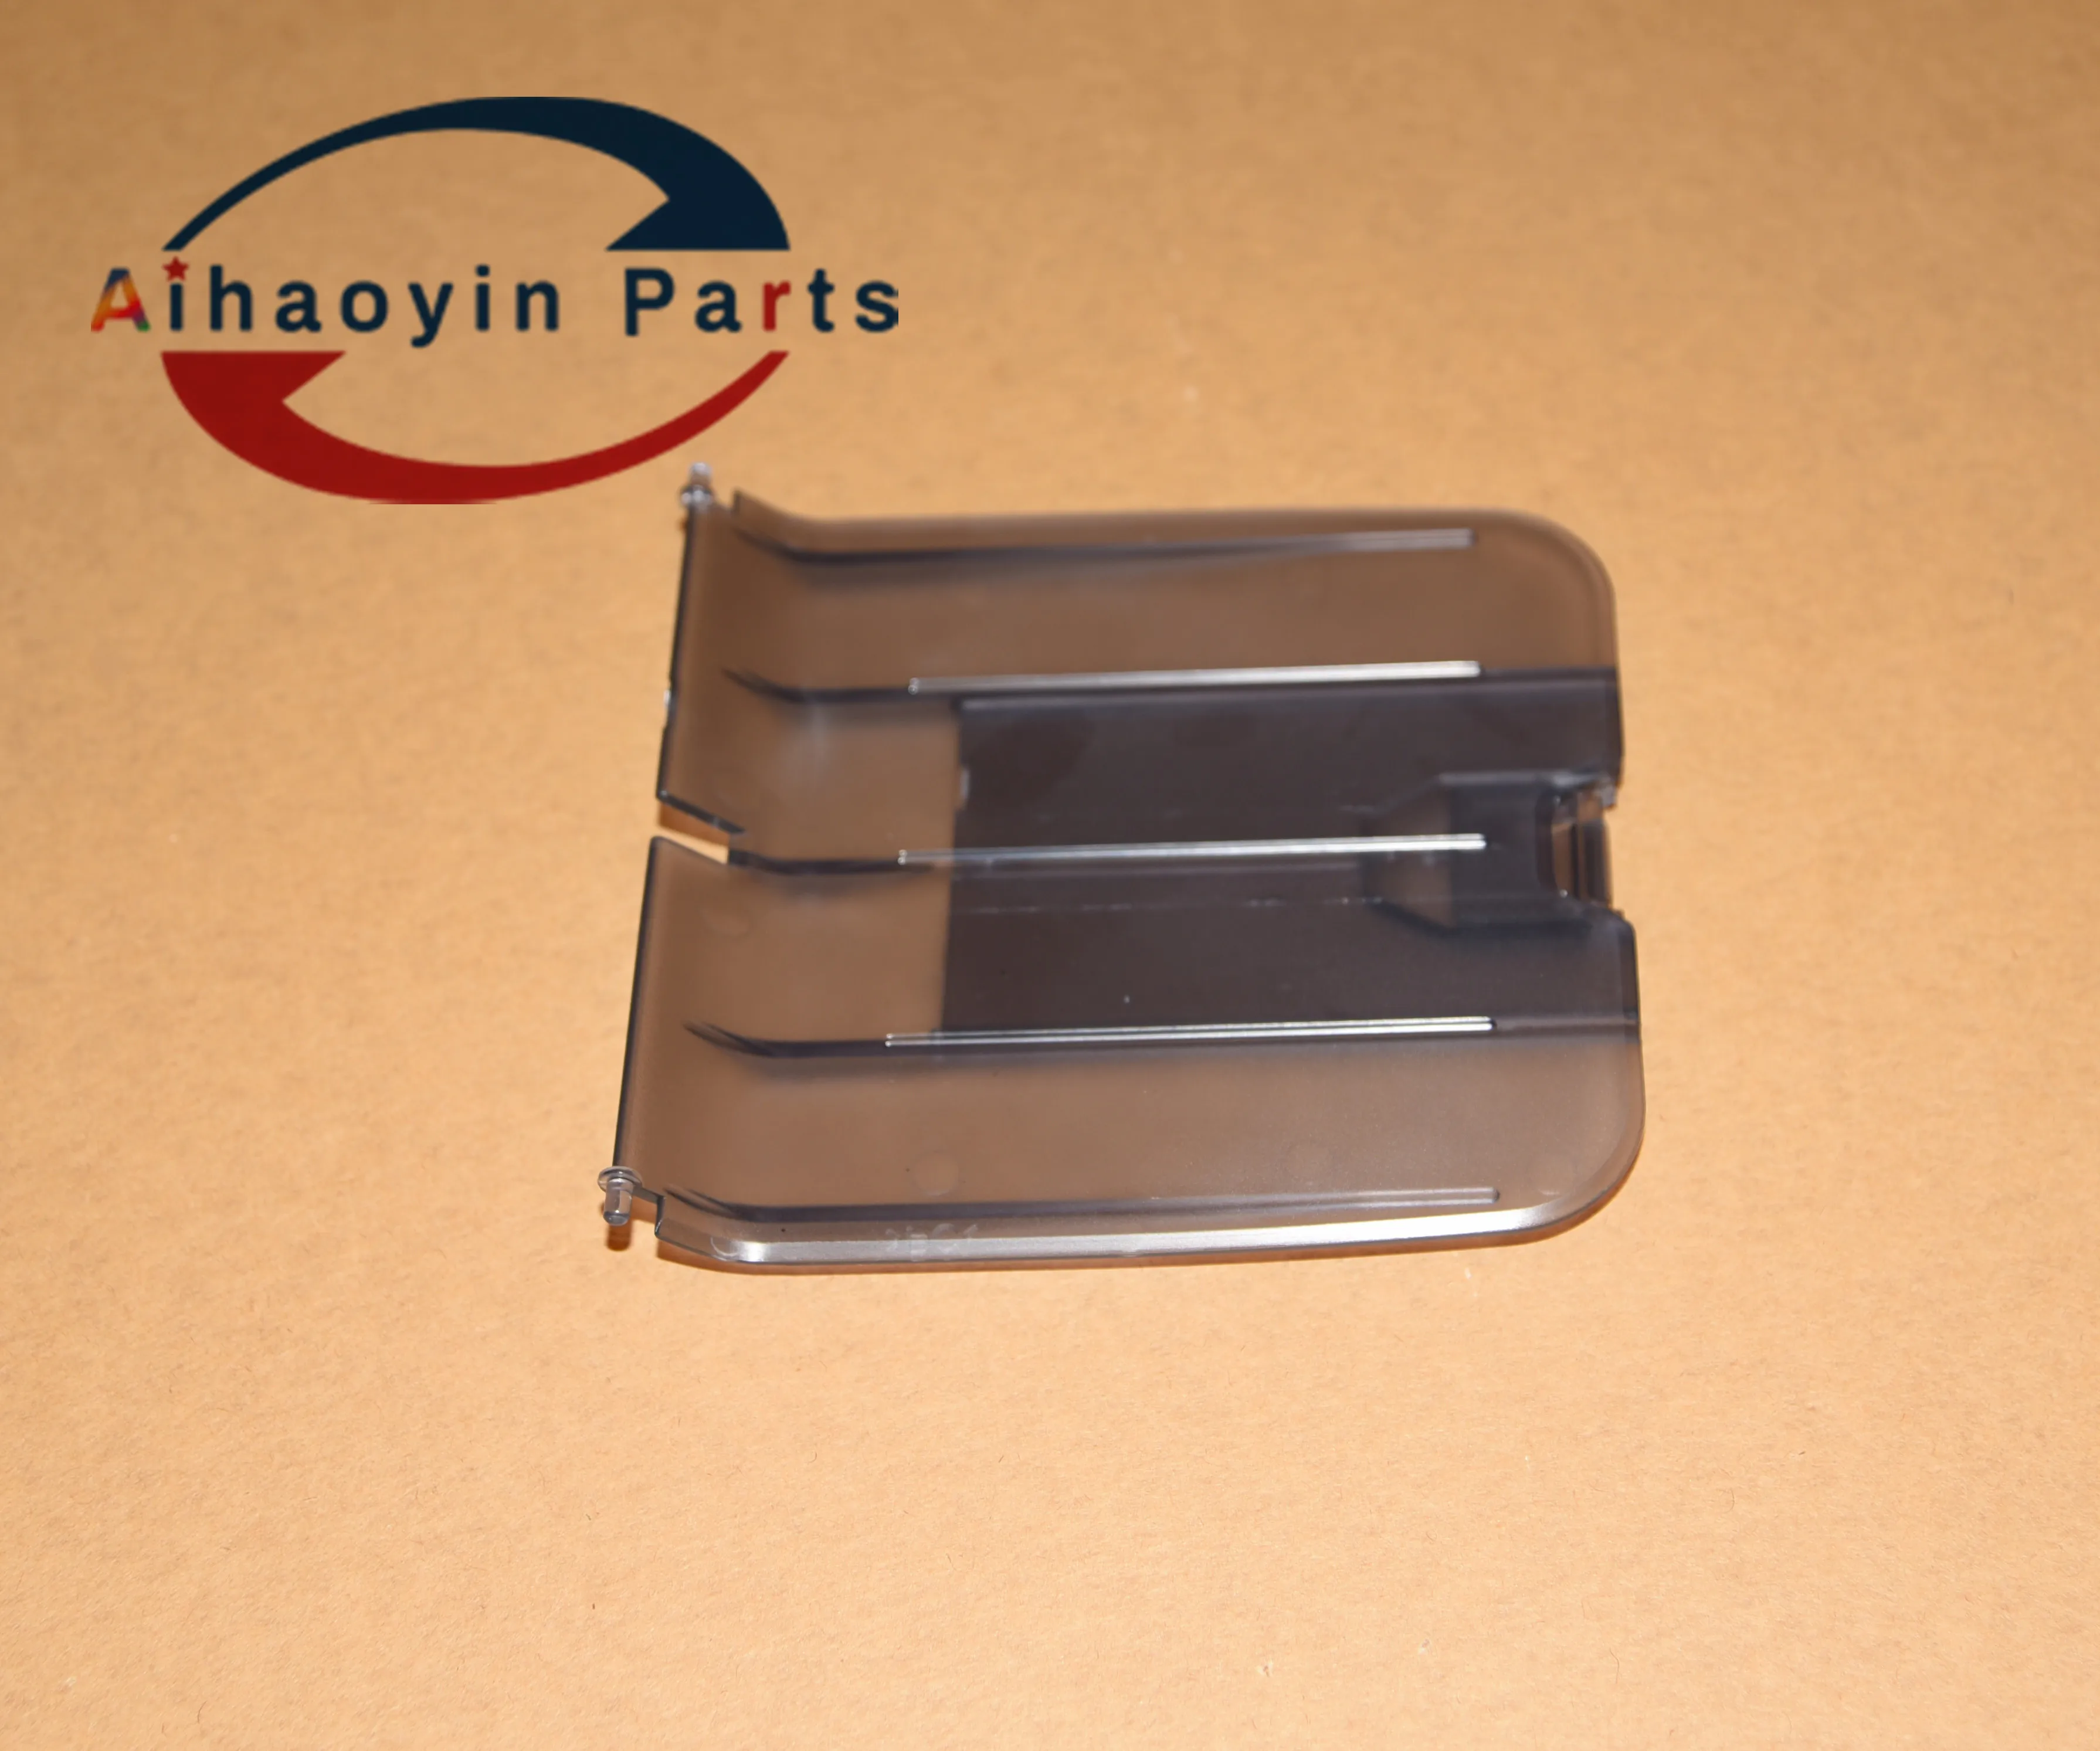 

1X RM1-0659-000 Tray for HP LaserJet 1010 1012 1015 1018 1018S 1022 1020 Plus Extender Paper Output Tray PAPER DELIVERY TRAY